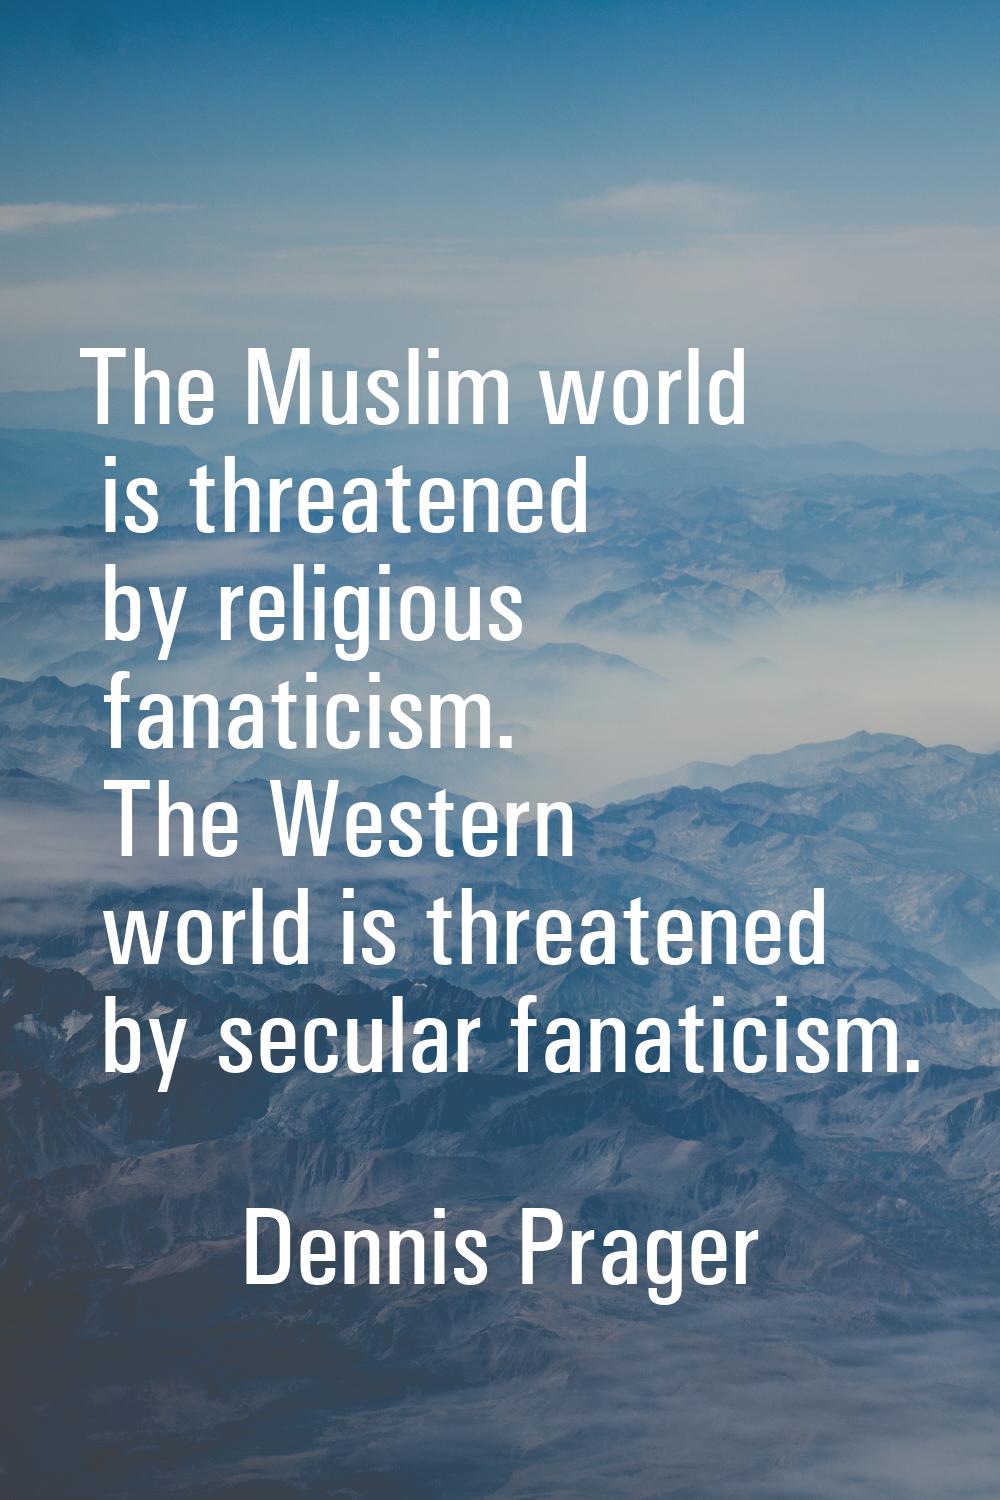 The Muslim world is threatened by religious fanaticism. The Western world is threatened by secular 